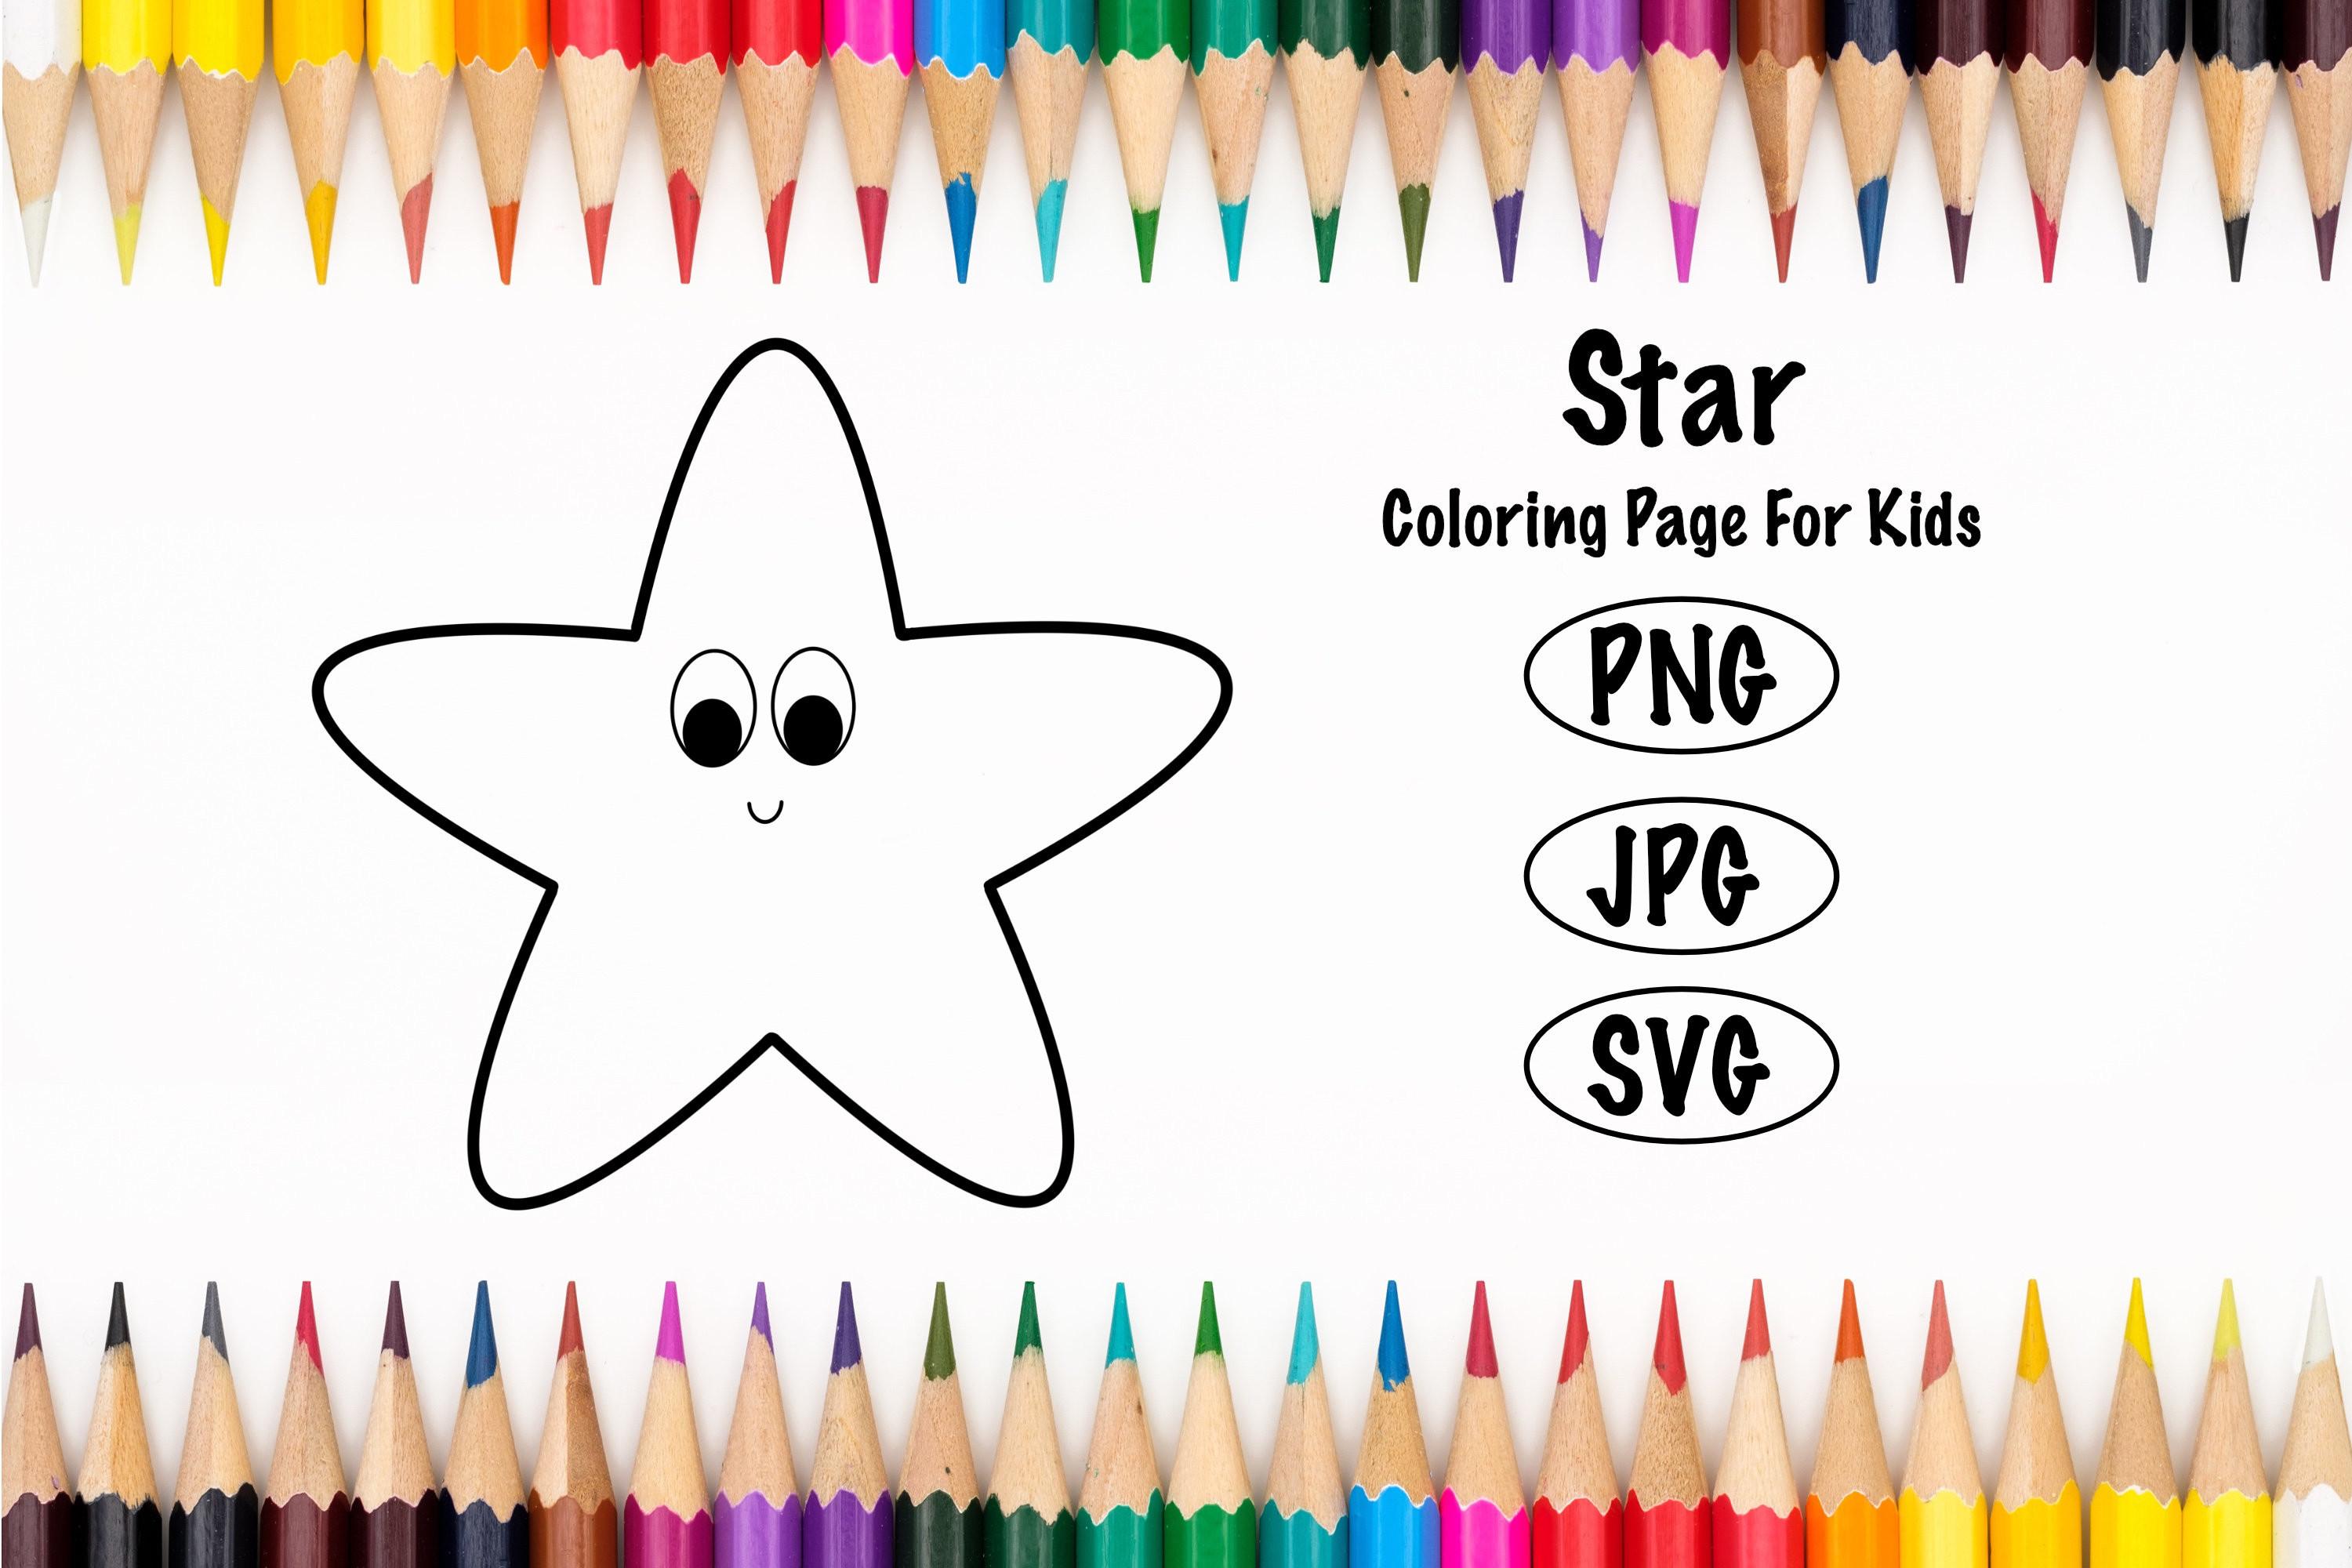 Smiling Star Coloring Page for Kids